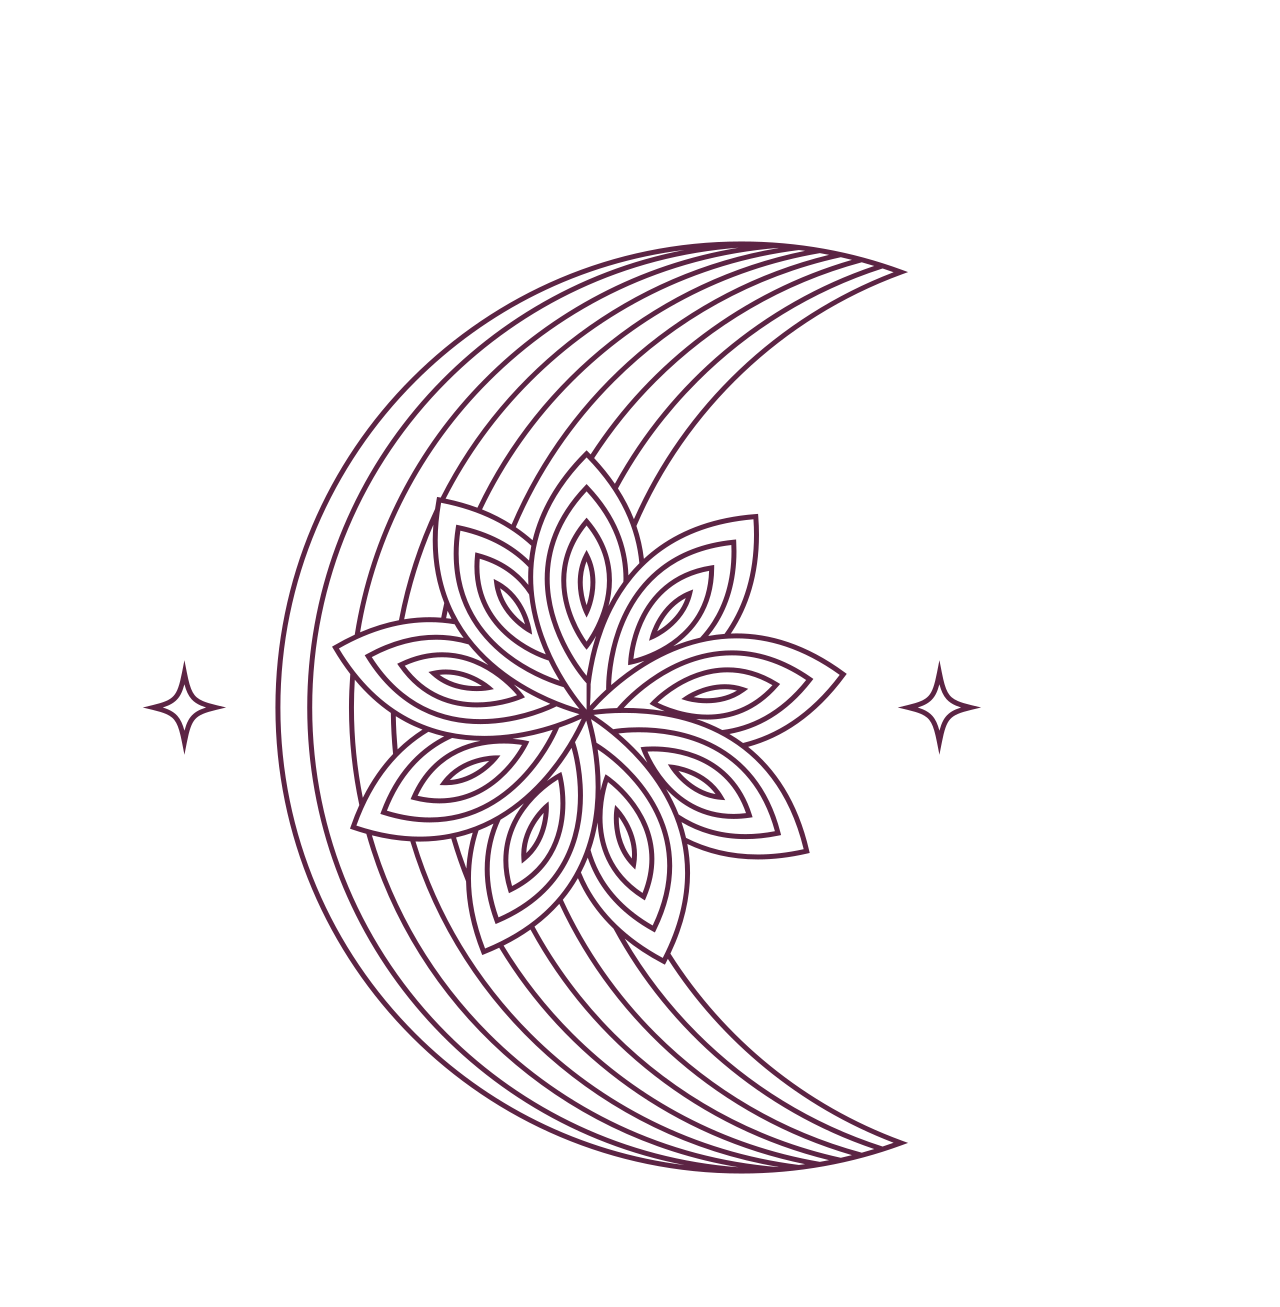 D'VYNA LUX's logo